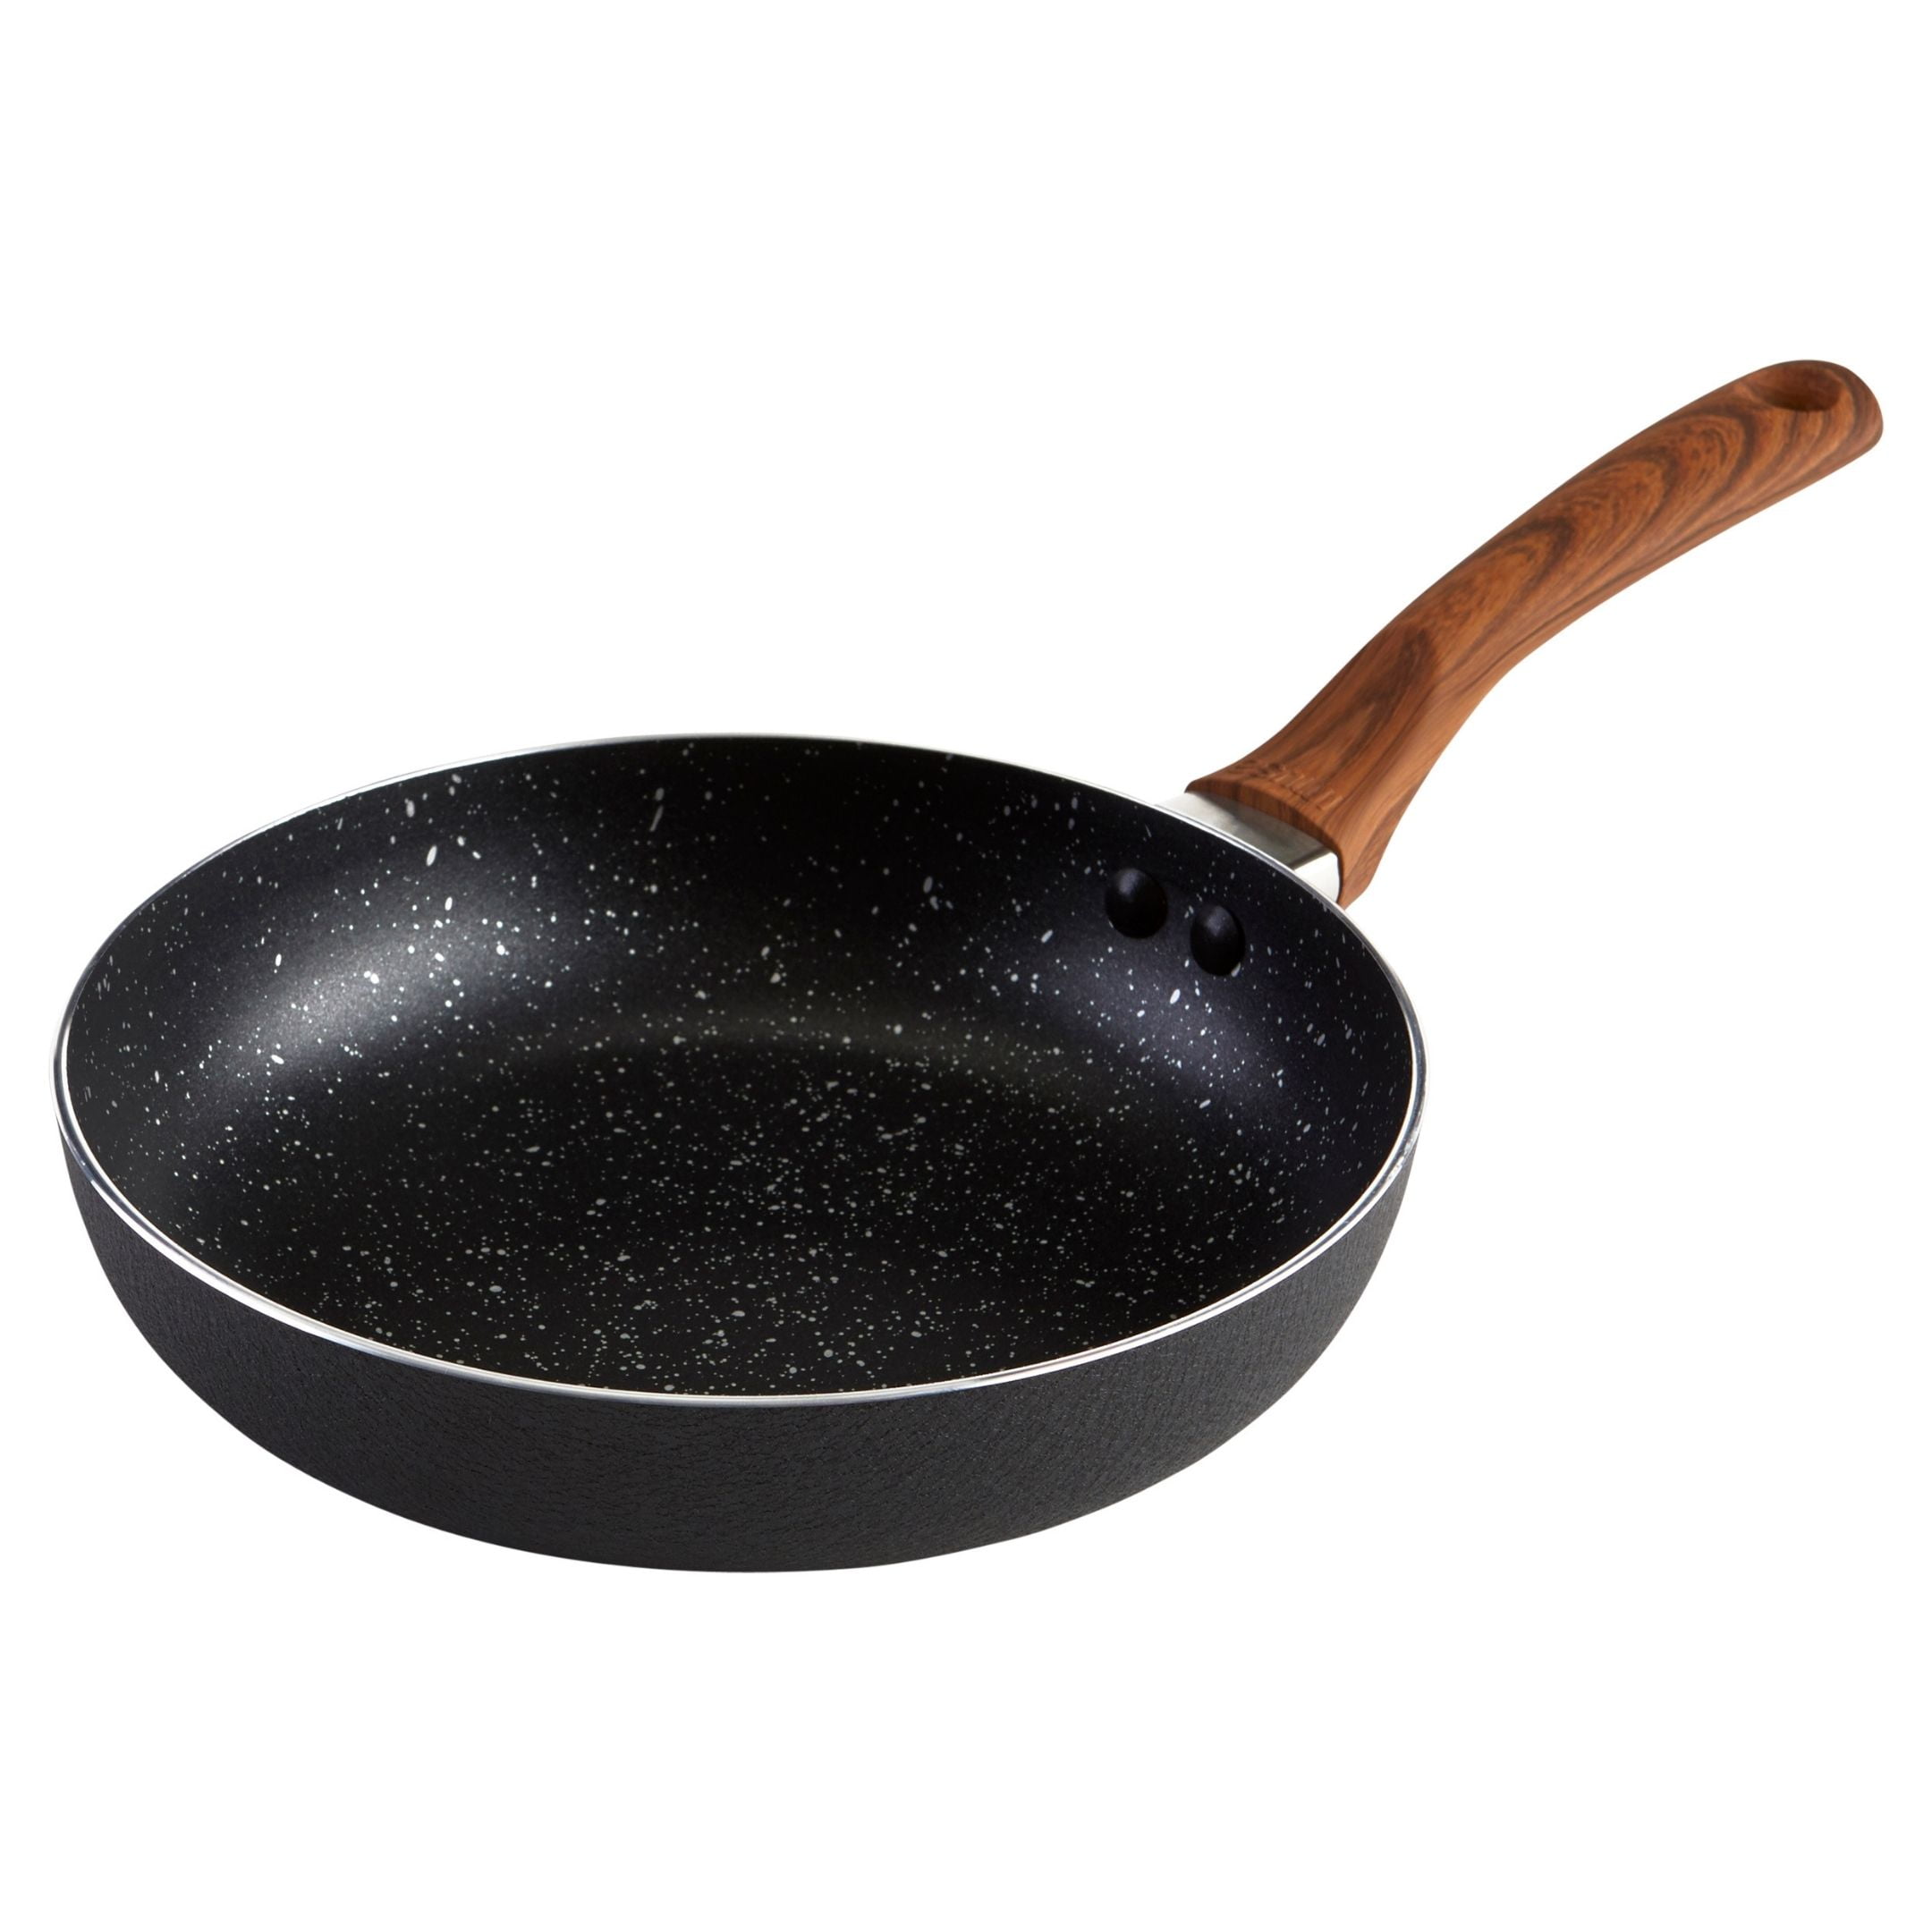 IMUSA 9.5 inch Black Stone Nonstick Fry Pan with Woodlook Handle